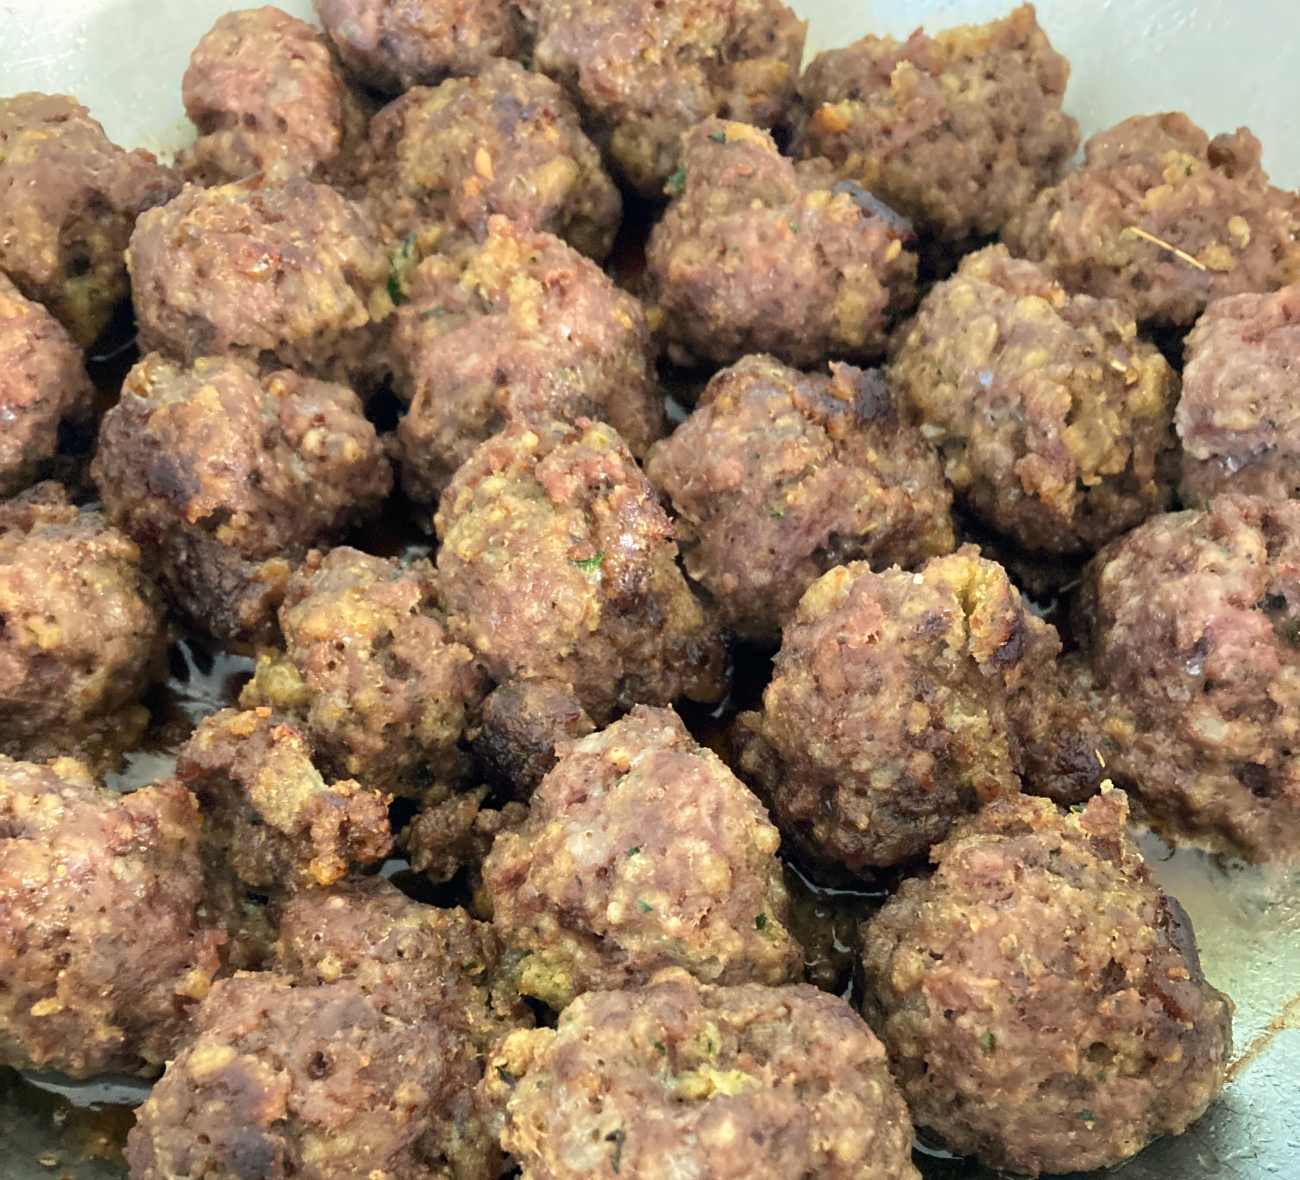 Preheat oven to 450˚F. Add 1 tablespoon oil and meatballs to pan. Cook for 5-6 minutes each side until browned.